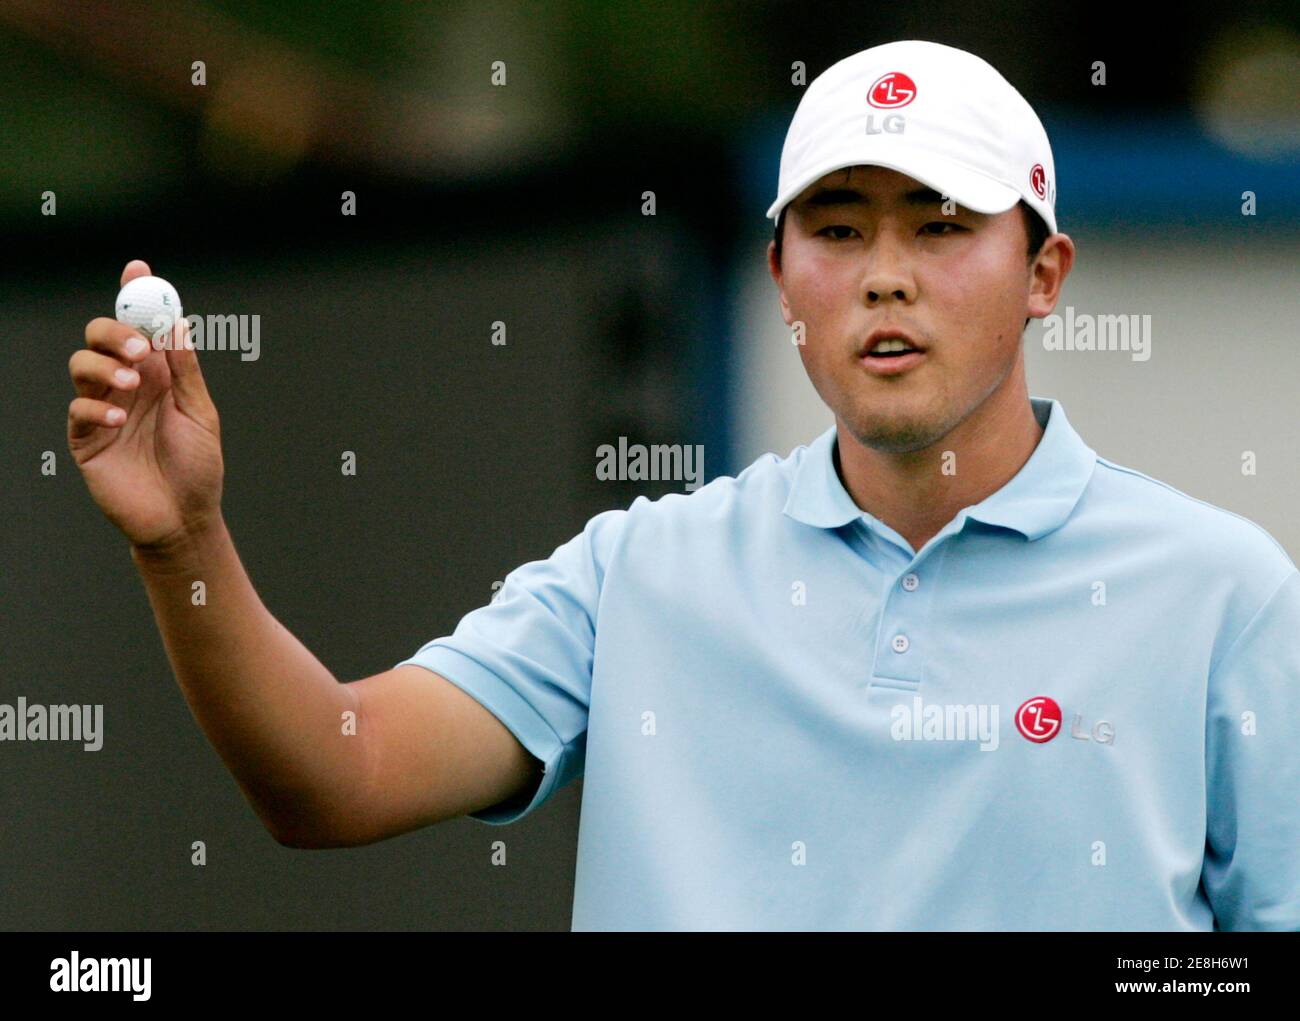 Australia's Lee Won-joon throws his ball into the crowd after finishing in equal third place at the Australian Open golf championship in Sydney December 16, 2007. REUTERS/Will Burgess    (AUSTRALIA) Stock Photo